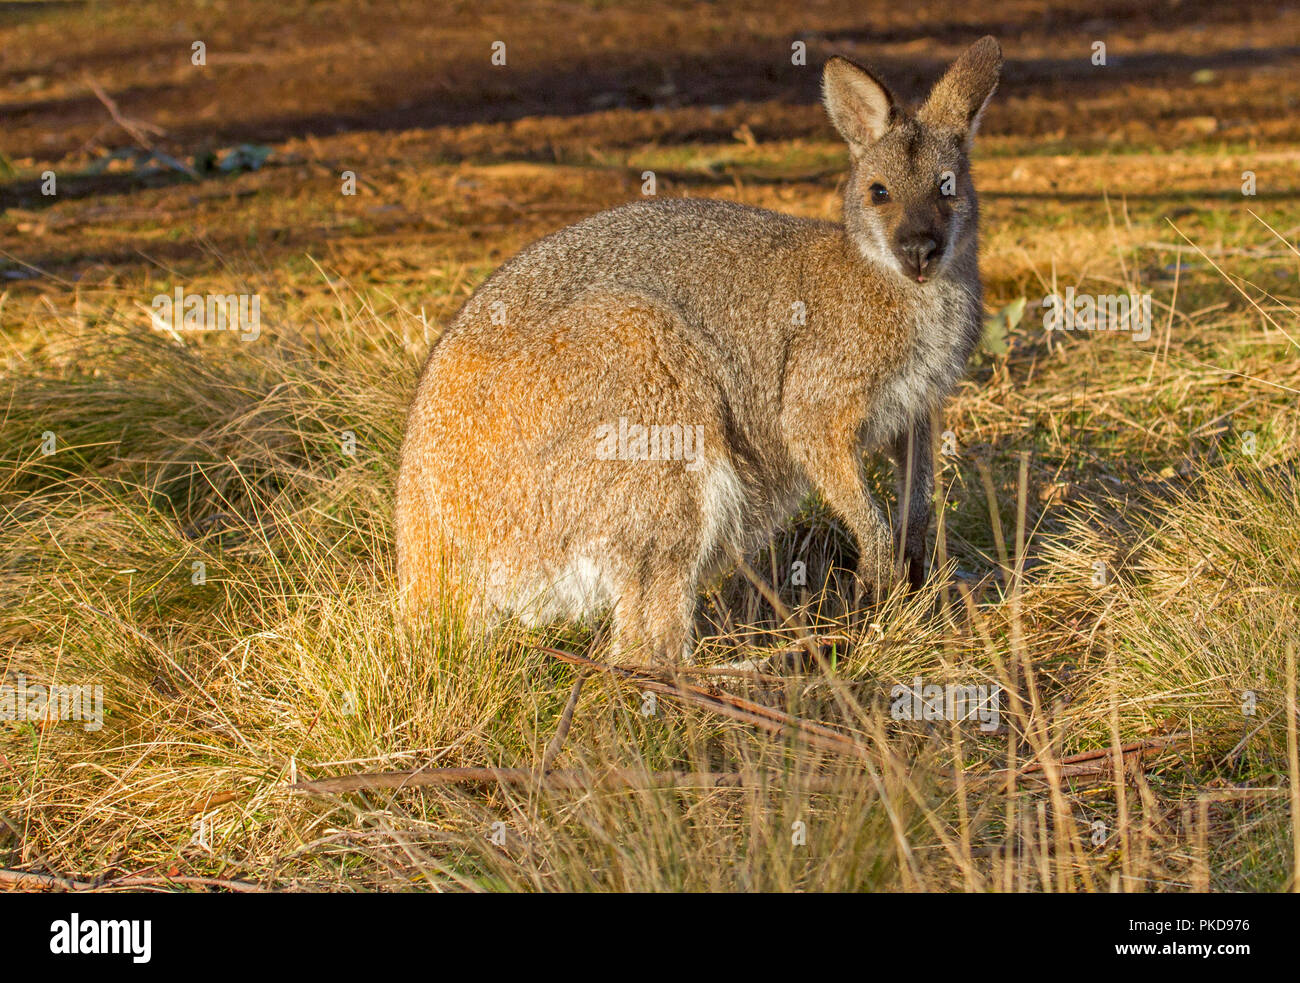 Australian red-necked wallaby, Macropus rufogriseus, among golden grasses, alert and staring at camera at Barrington Tops National Park in NSW Stock Photo